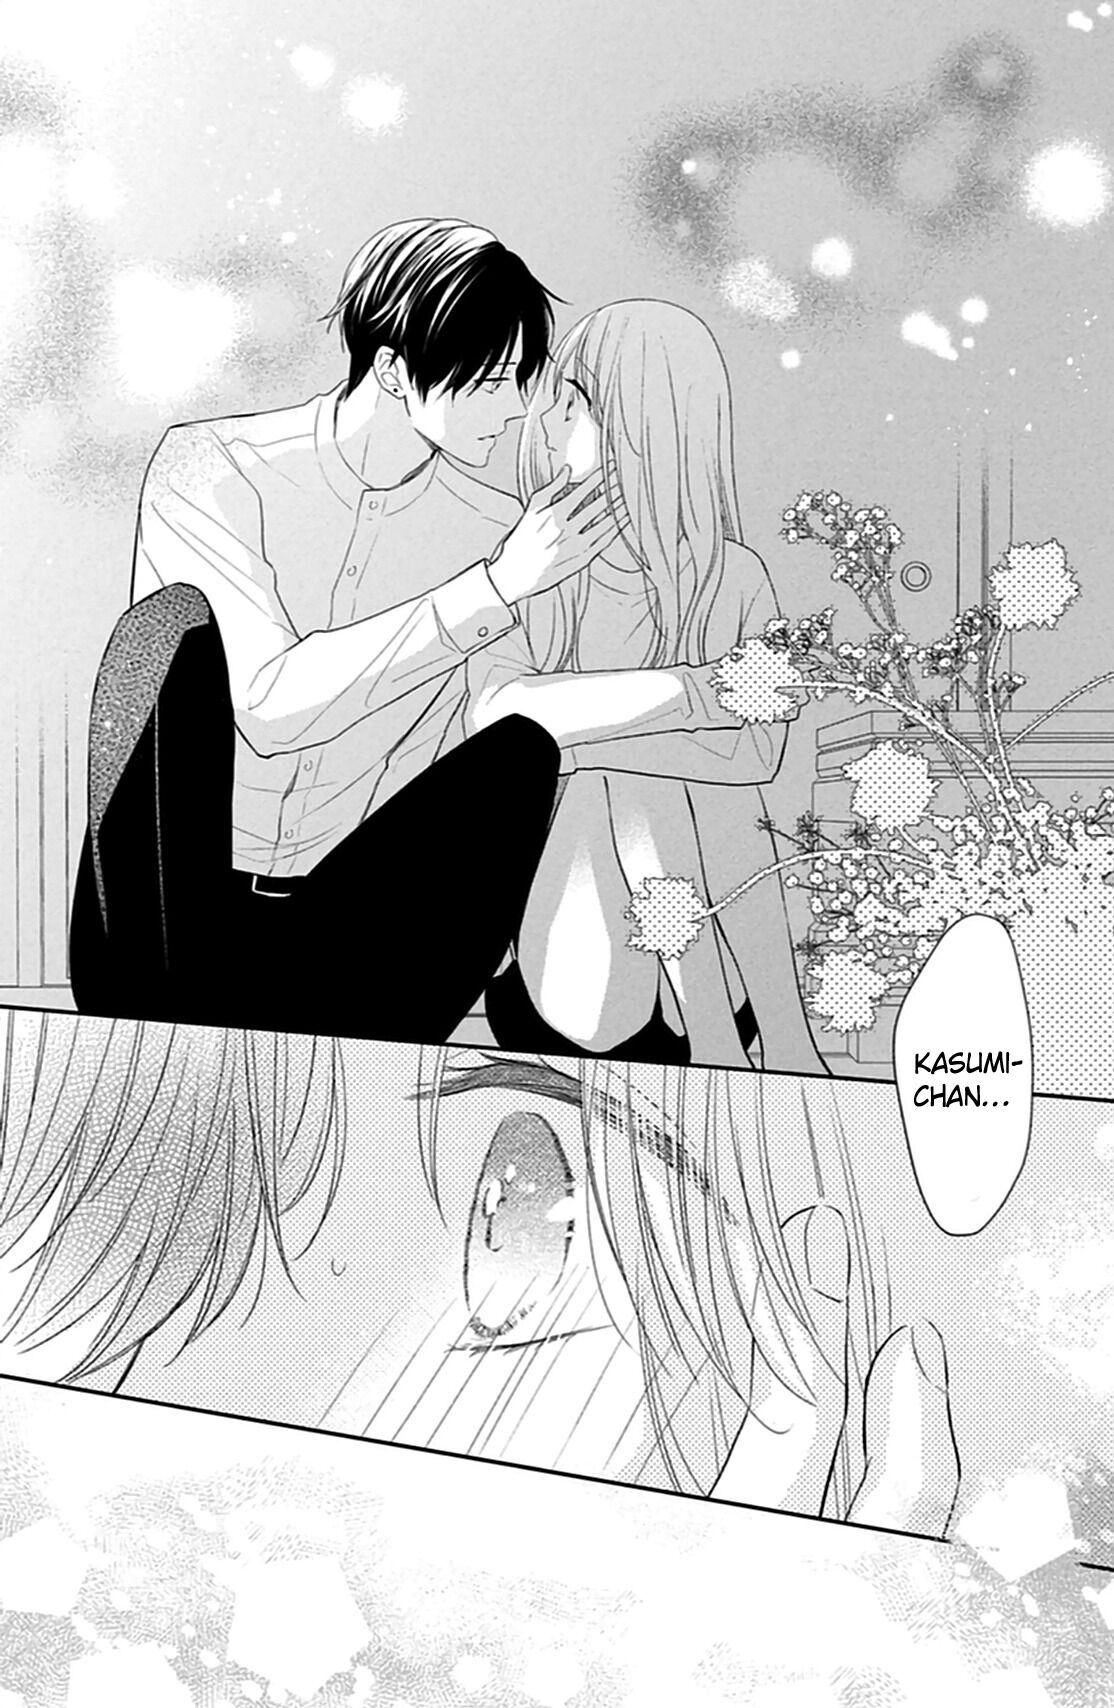 Flowers and Kisses - Chapter 5 - Manga Queen